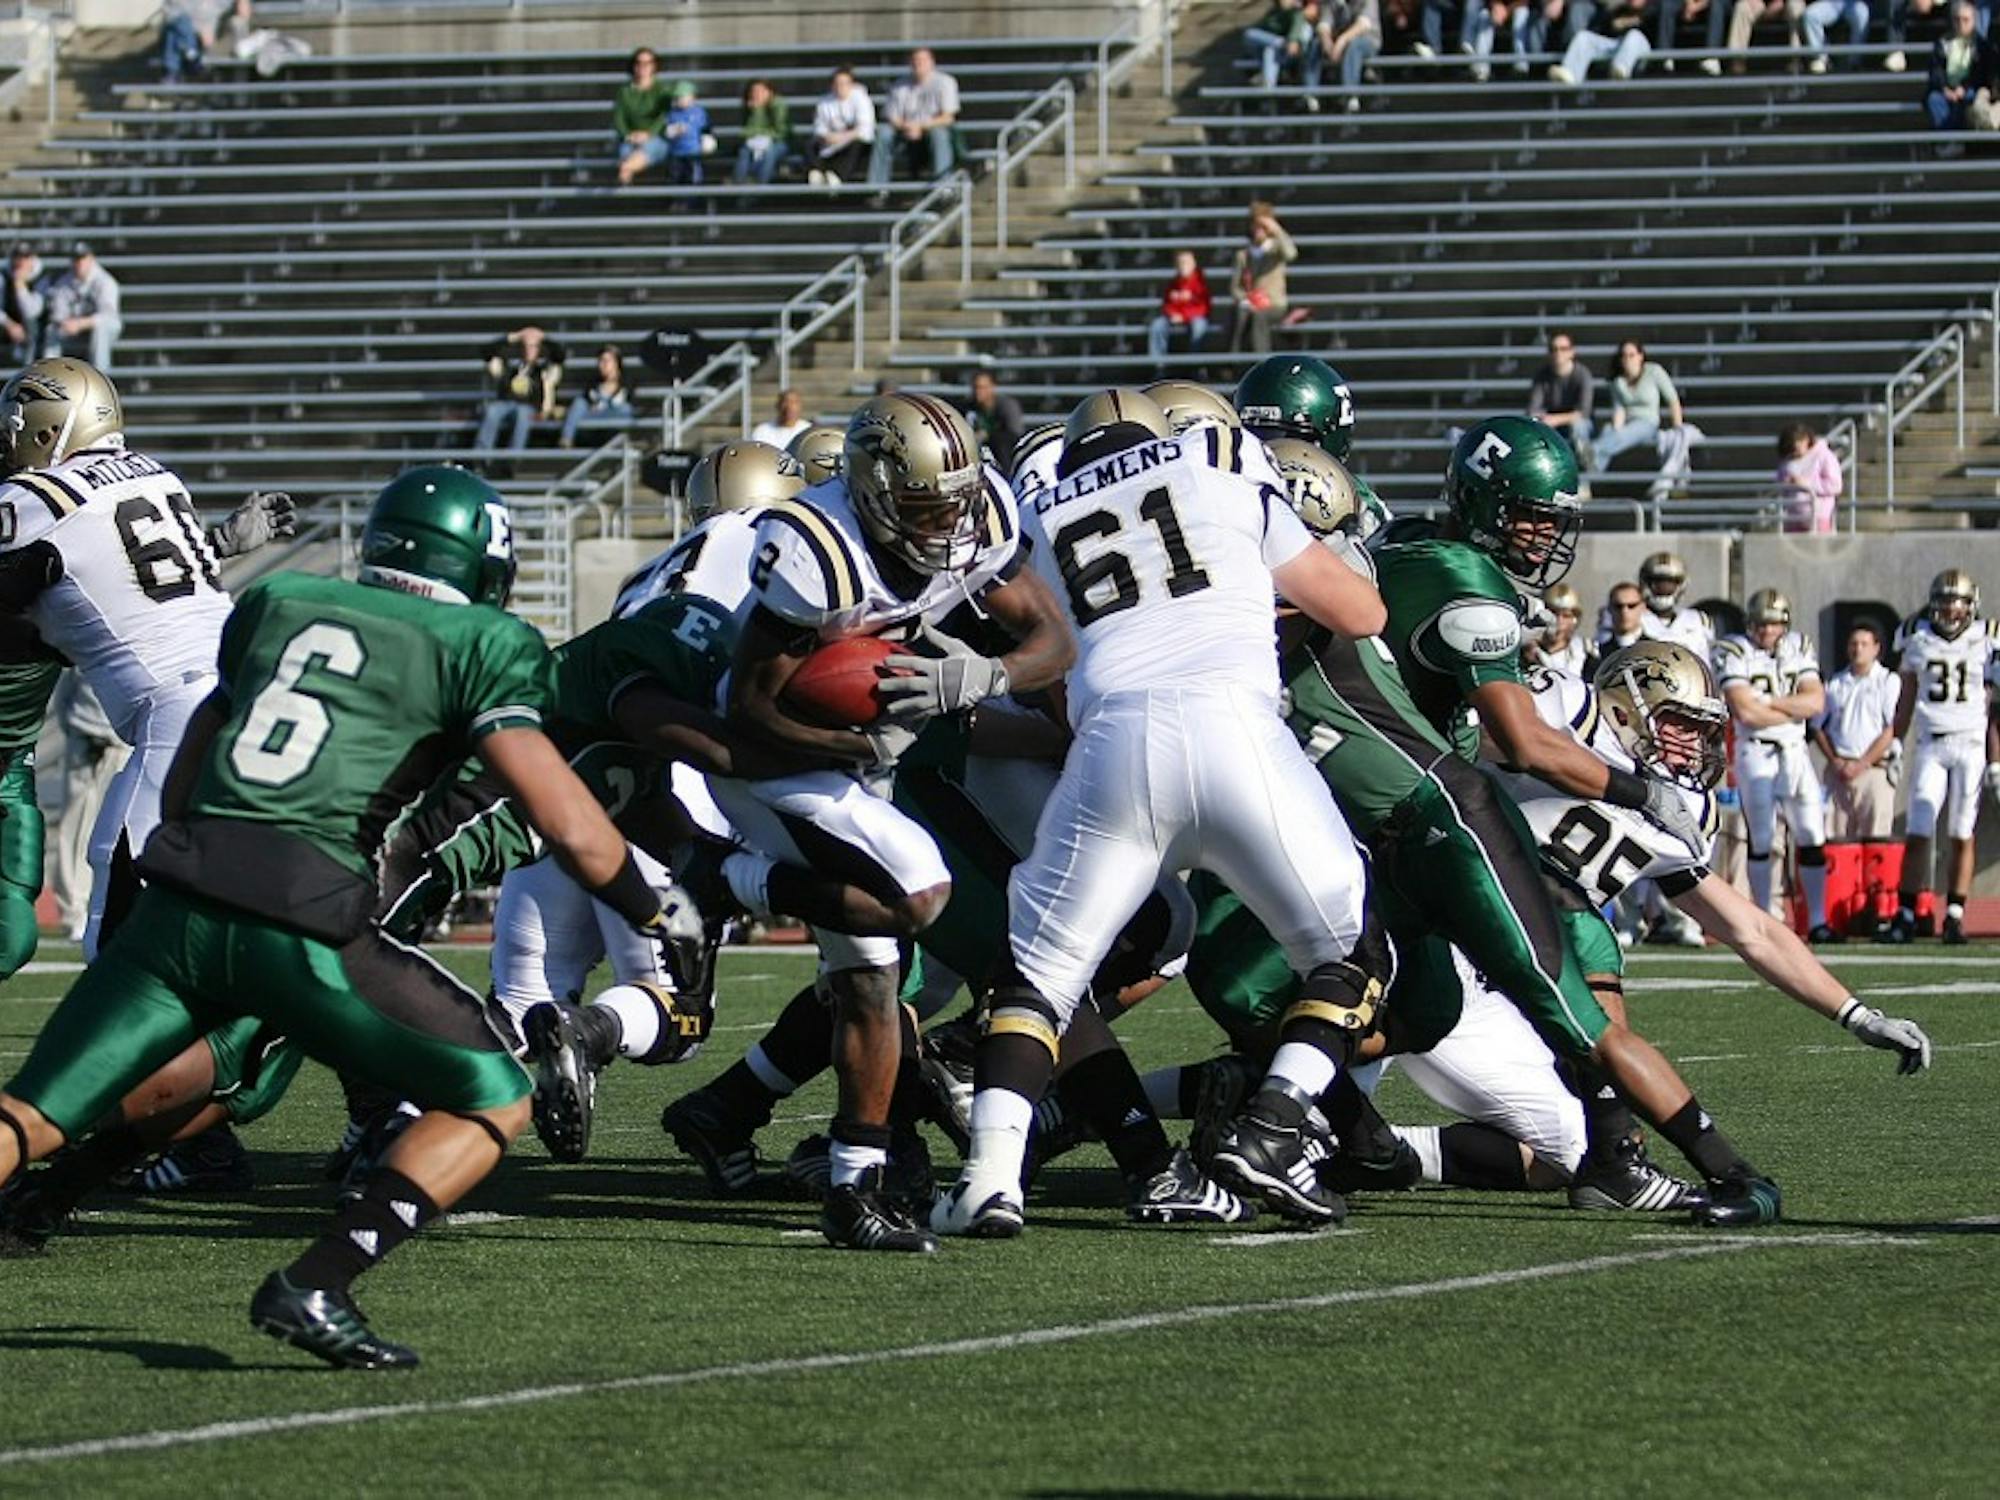 Western Michigan tailback Brandon West (2) rushes against Eastern Michigan on Saturday at Rynearson Stadium. He set the FBS record for most career all-purpose yards.